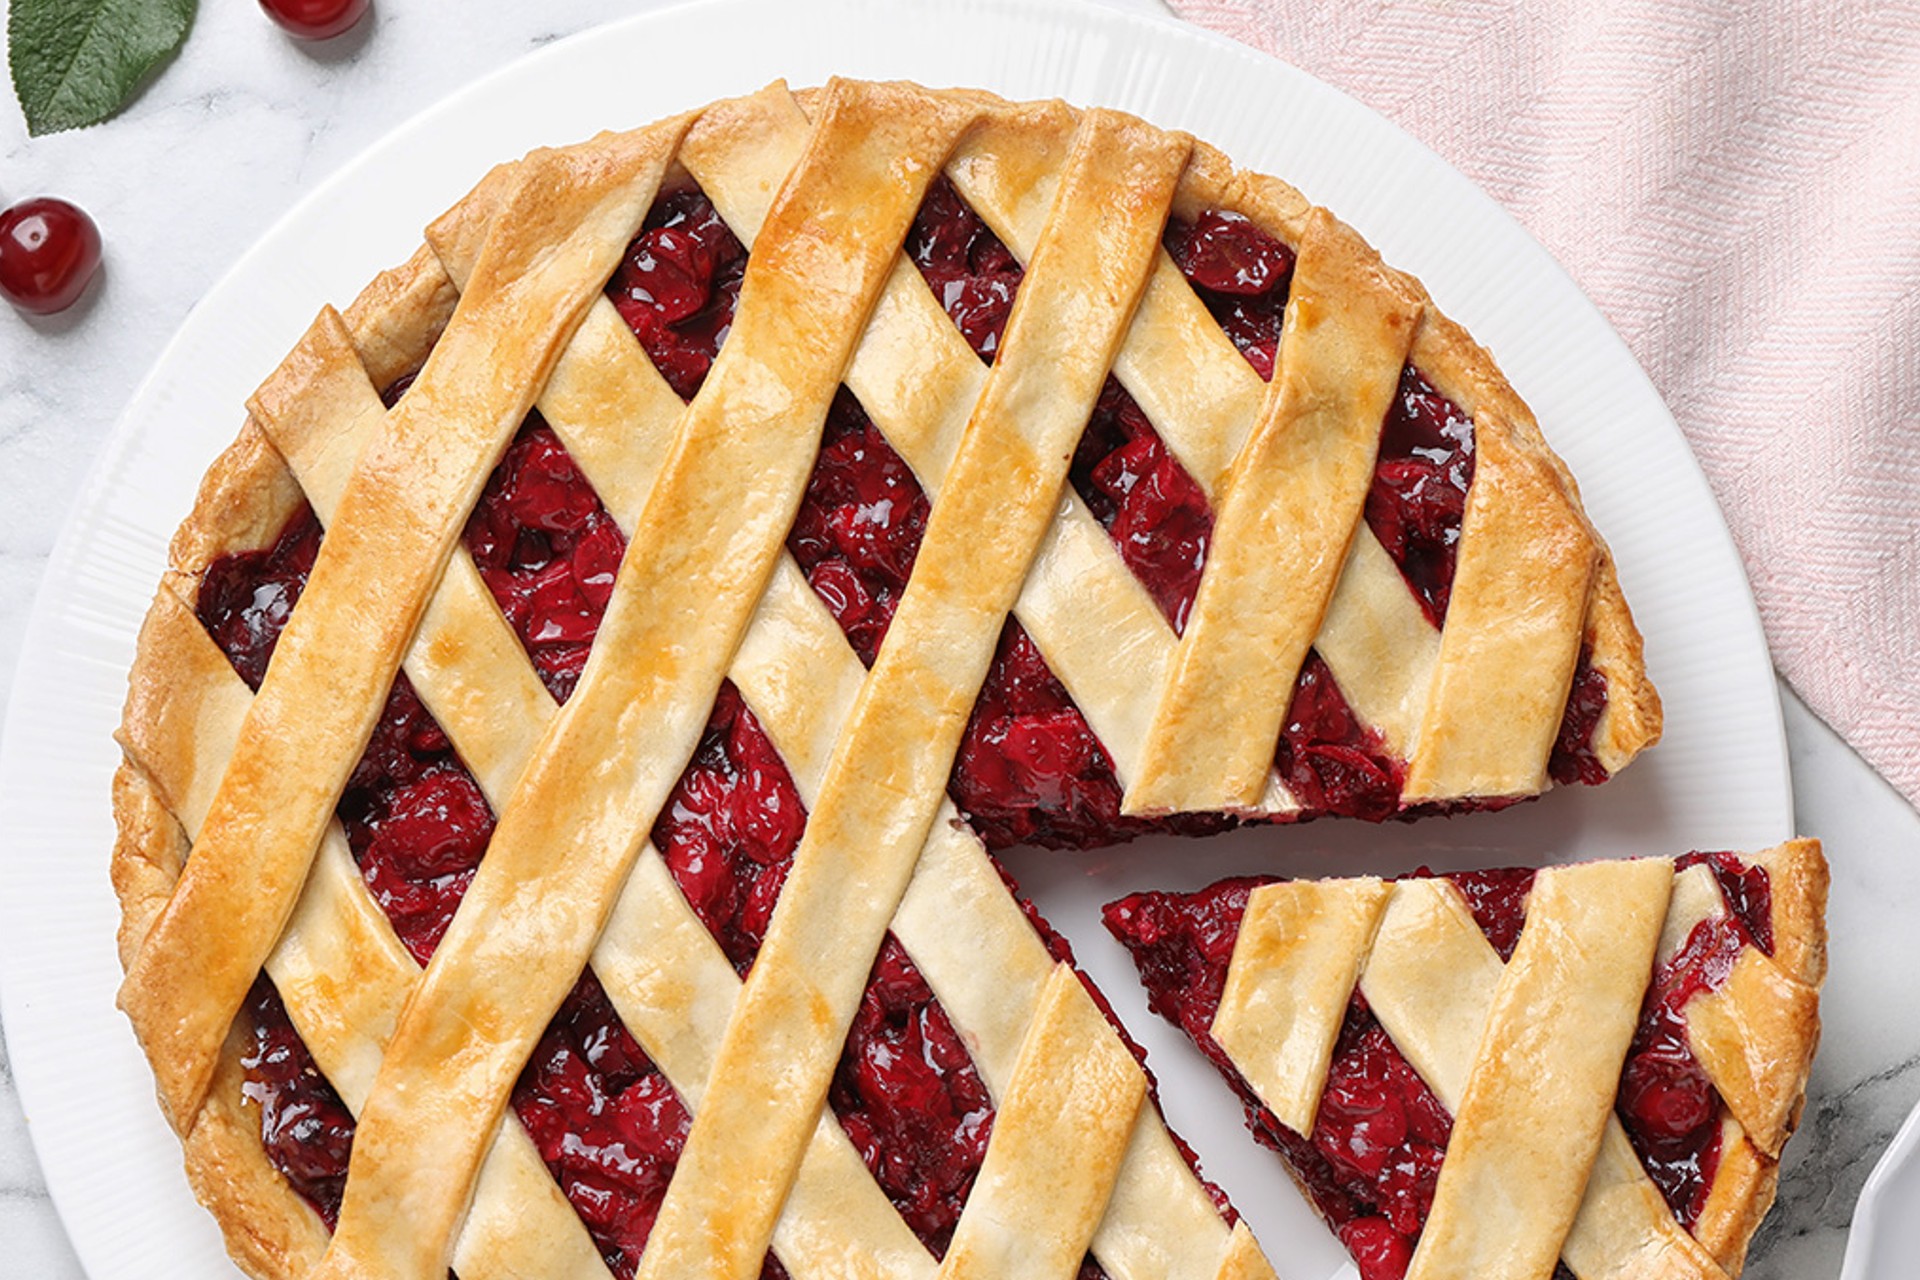 Deep dish cherry pie recipe on a plate with a tempting slice taken out